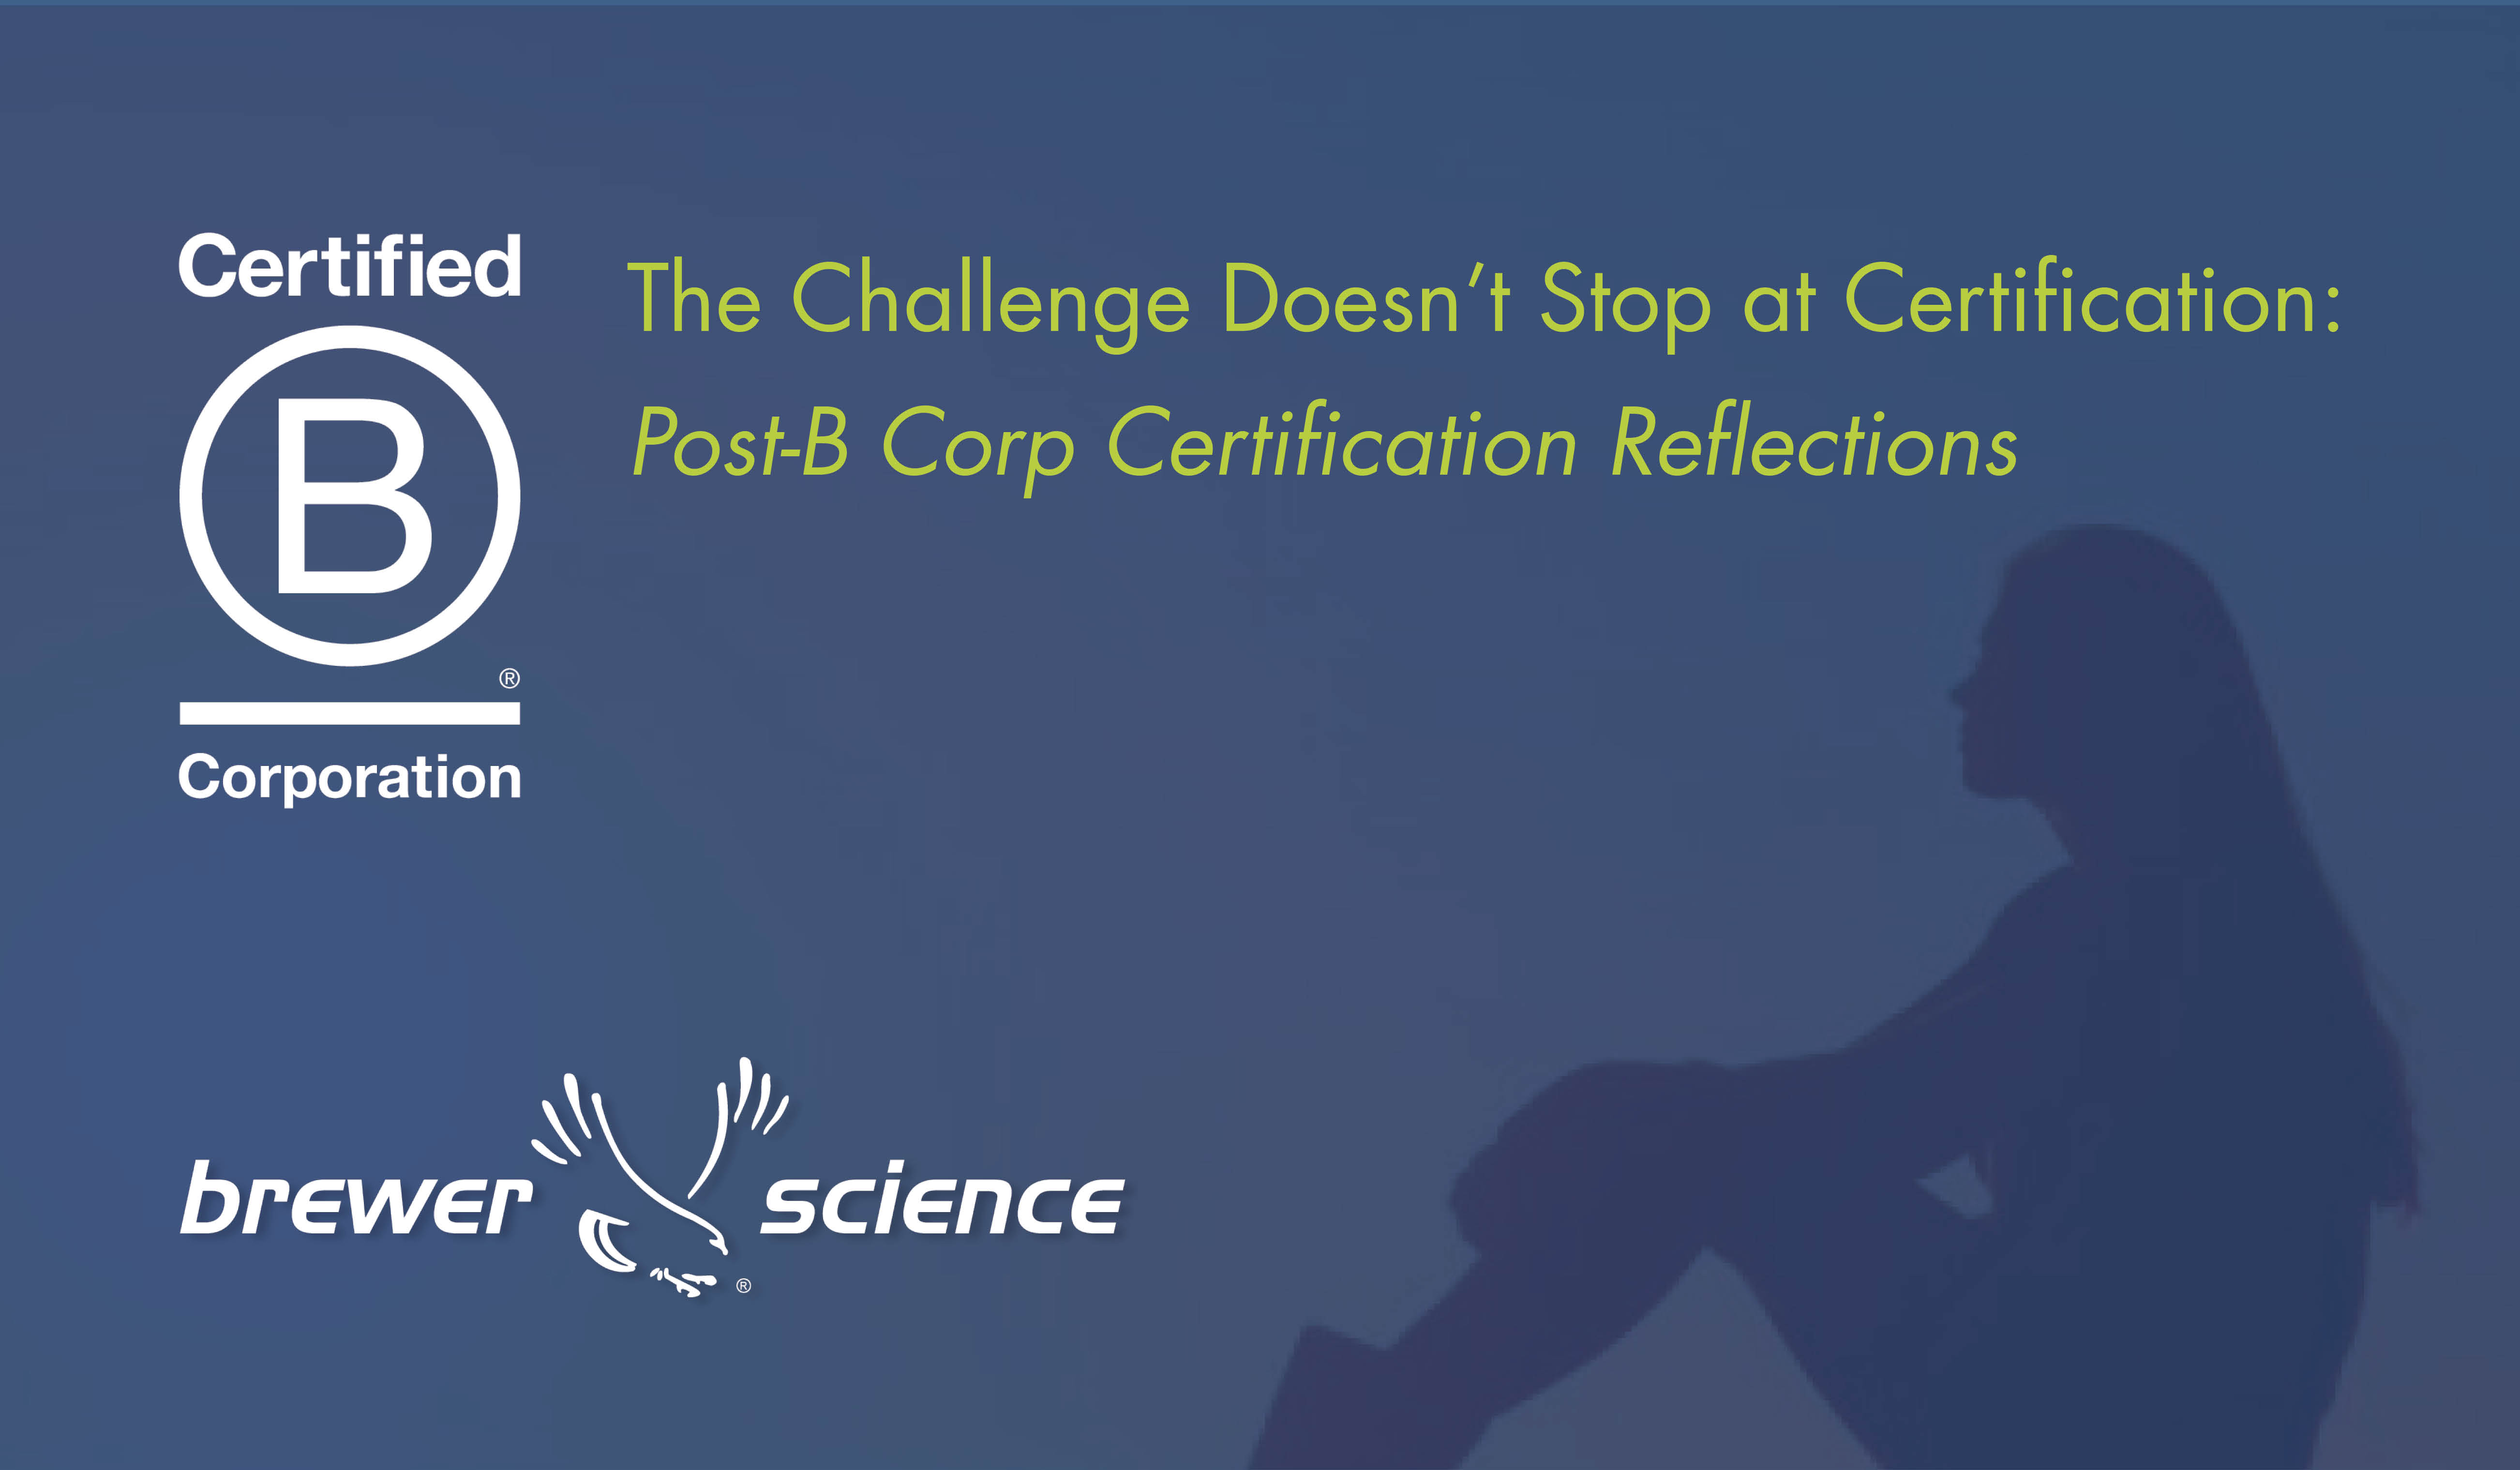 The Challenge Doesn’t Stop at Certification: Post-B Corp Certification Reflections